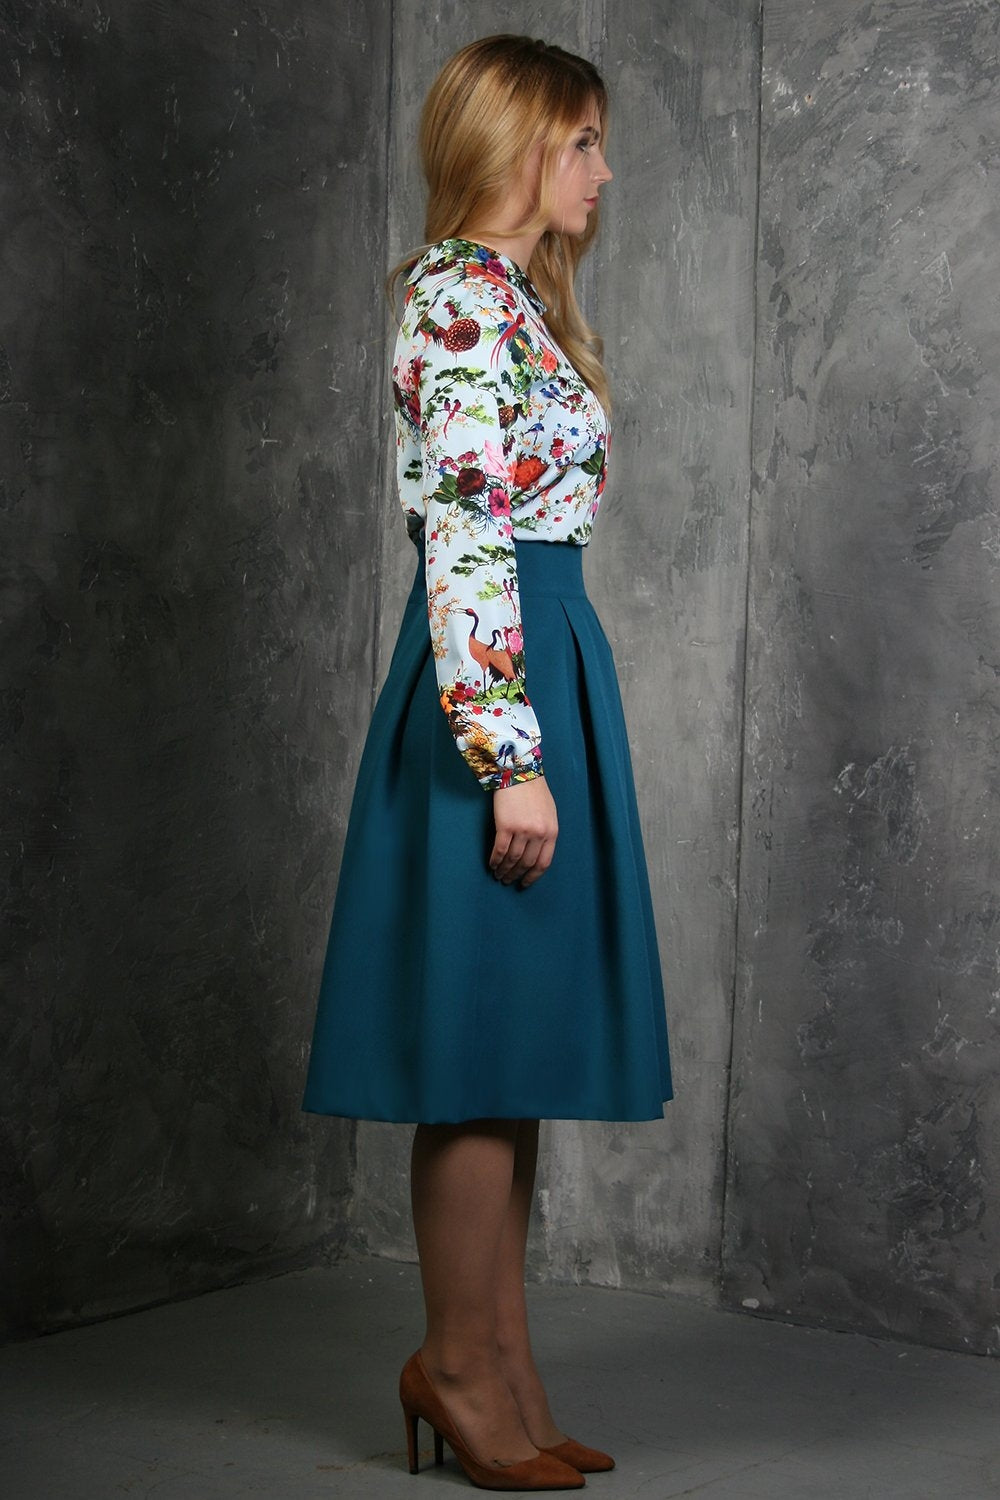 Blue-green flared skirts with side pockets